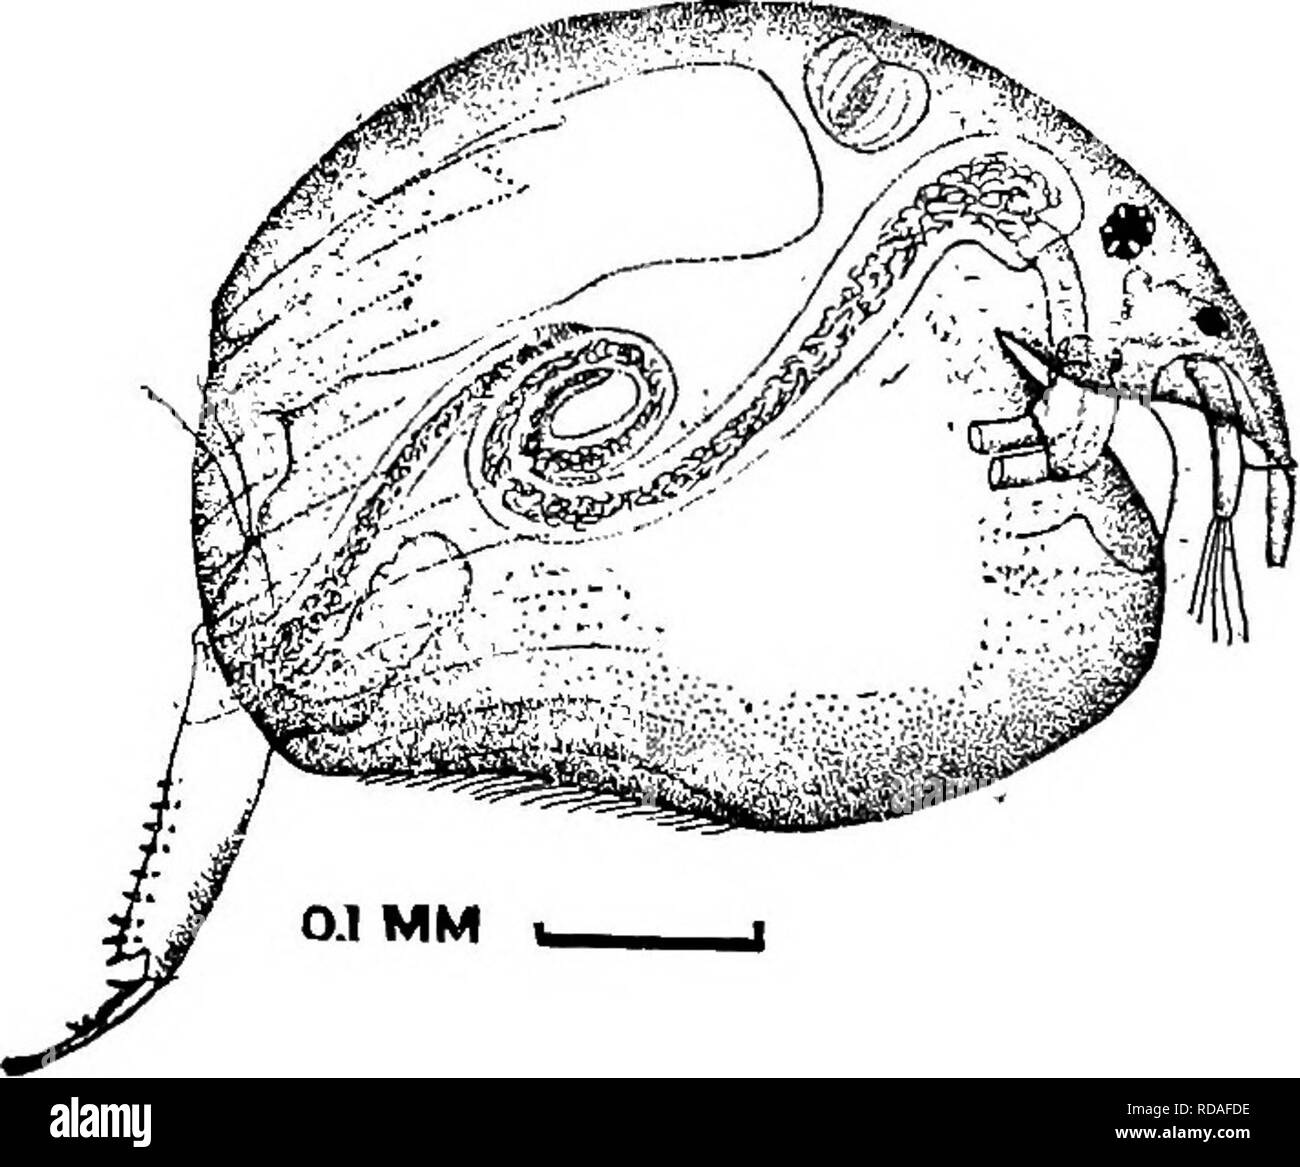 . Fresh-water biology. Freshwater biology. 0.1 MM. 127 (126) Post-abdomen with 20-30 marginal denticles. Camptocercus macrurus (O. F. Miiller) 1785. Much Uke the preceding. Very rare, but reported from most regions in the United States. Undoubtedly the preceding species has been mistaken for this by some observers. 128 (125) Crest on valves only. Kurzia Dybowski and Grochowski 1894. This genus is Alonopsis (part) of older authors; Pseudalona Sars, Sole American species Kurzia latissima (Kurz) 1874.. General form subguadrate; greatly compressed; but with only slight crest on back, none on head. Stock Photo